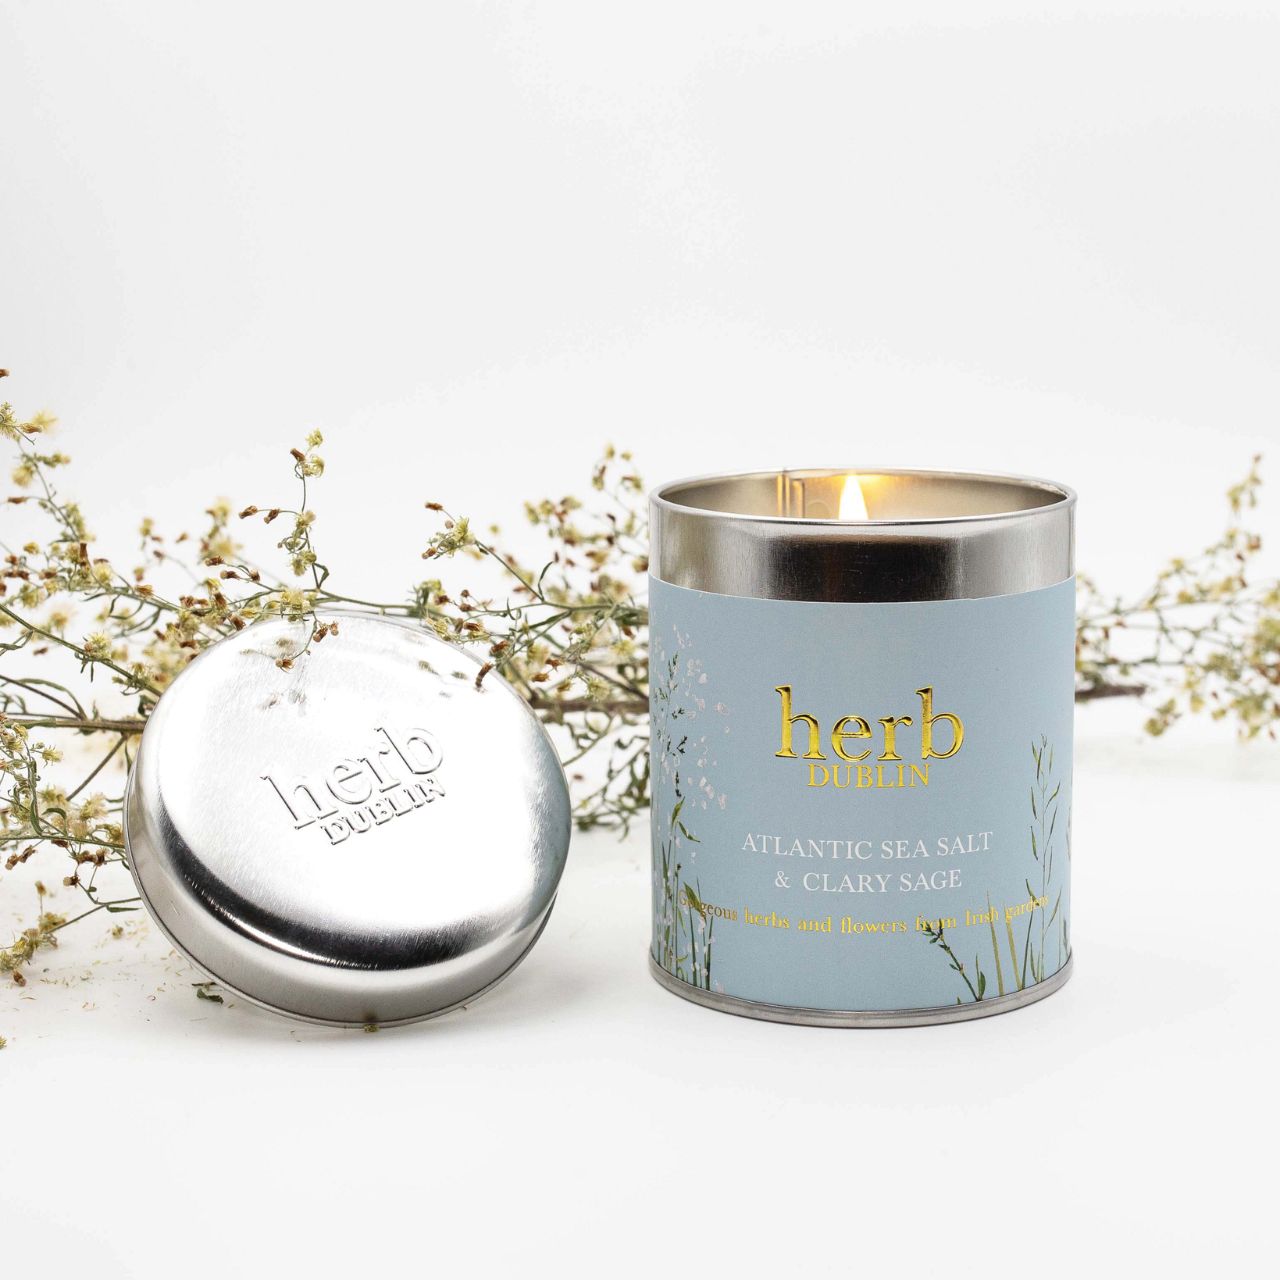 We’ve left the garden and headed to the sea. Fresh Atlantic sea salt and gorgeous coastal elements make this our most light and fresh and Irish scent! We have captured this gorgeous scent for you, available in tins (idea for travel) and jar candles.